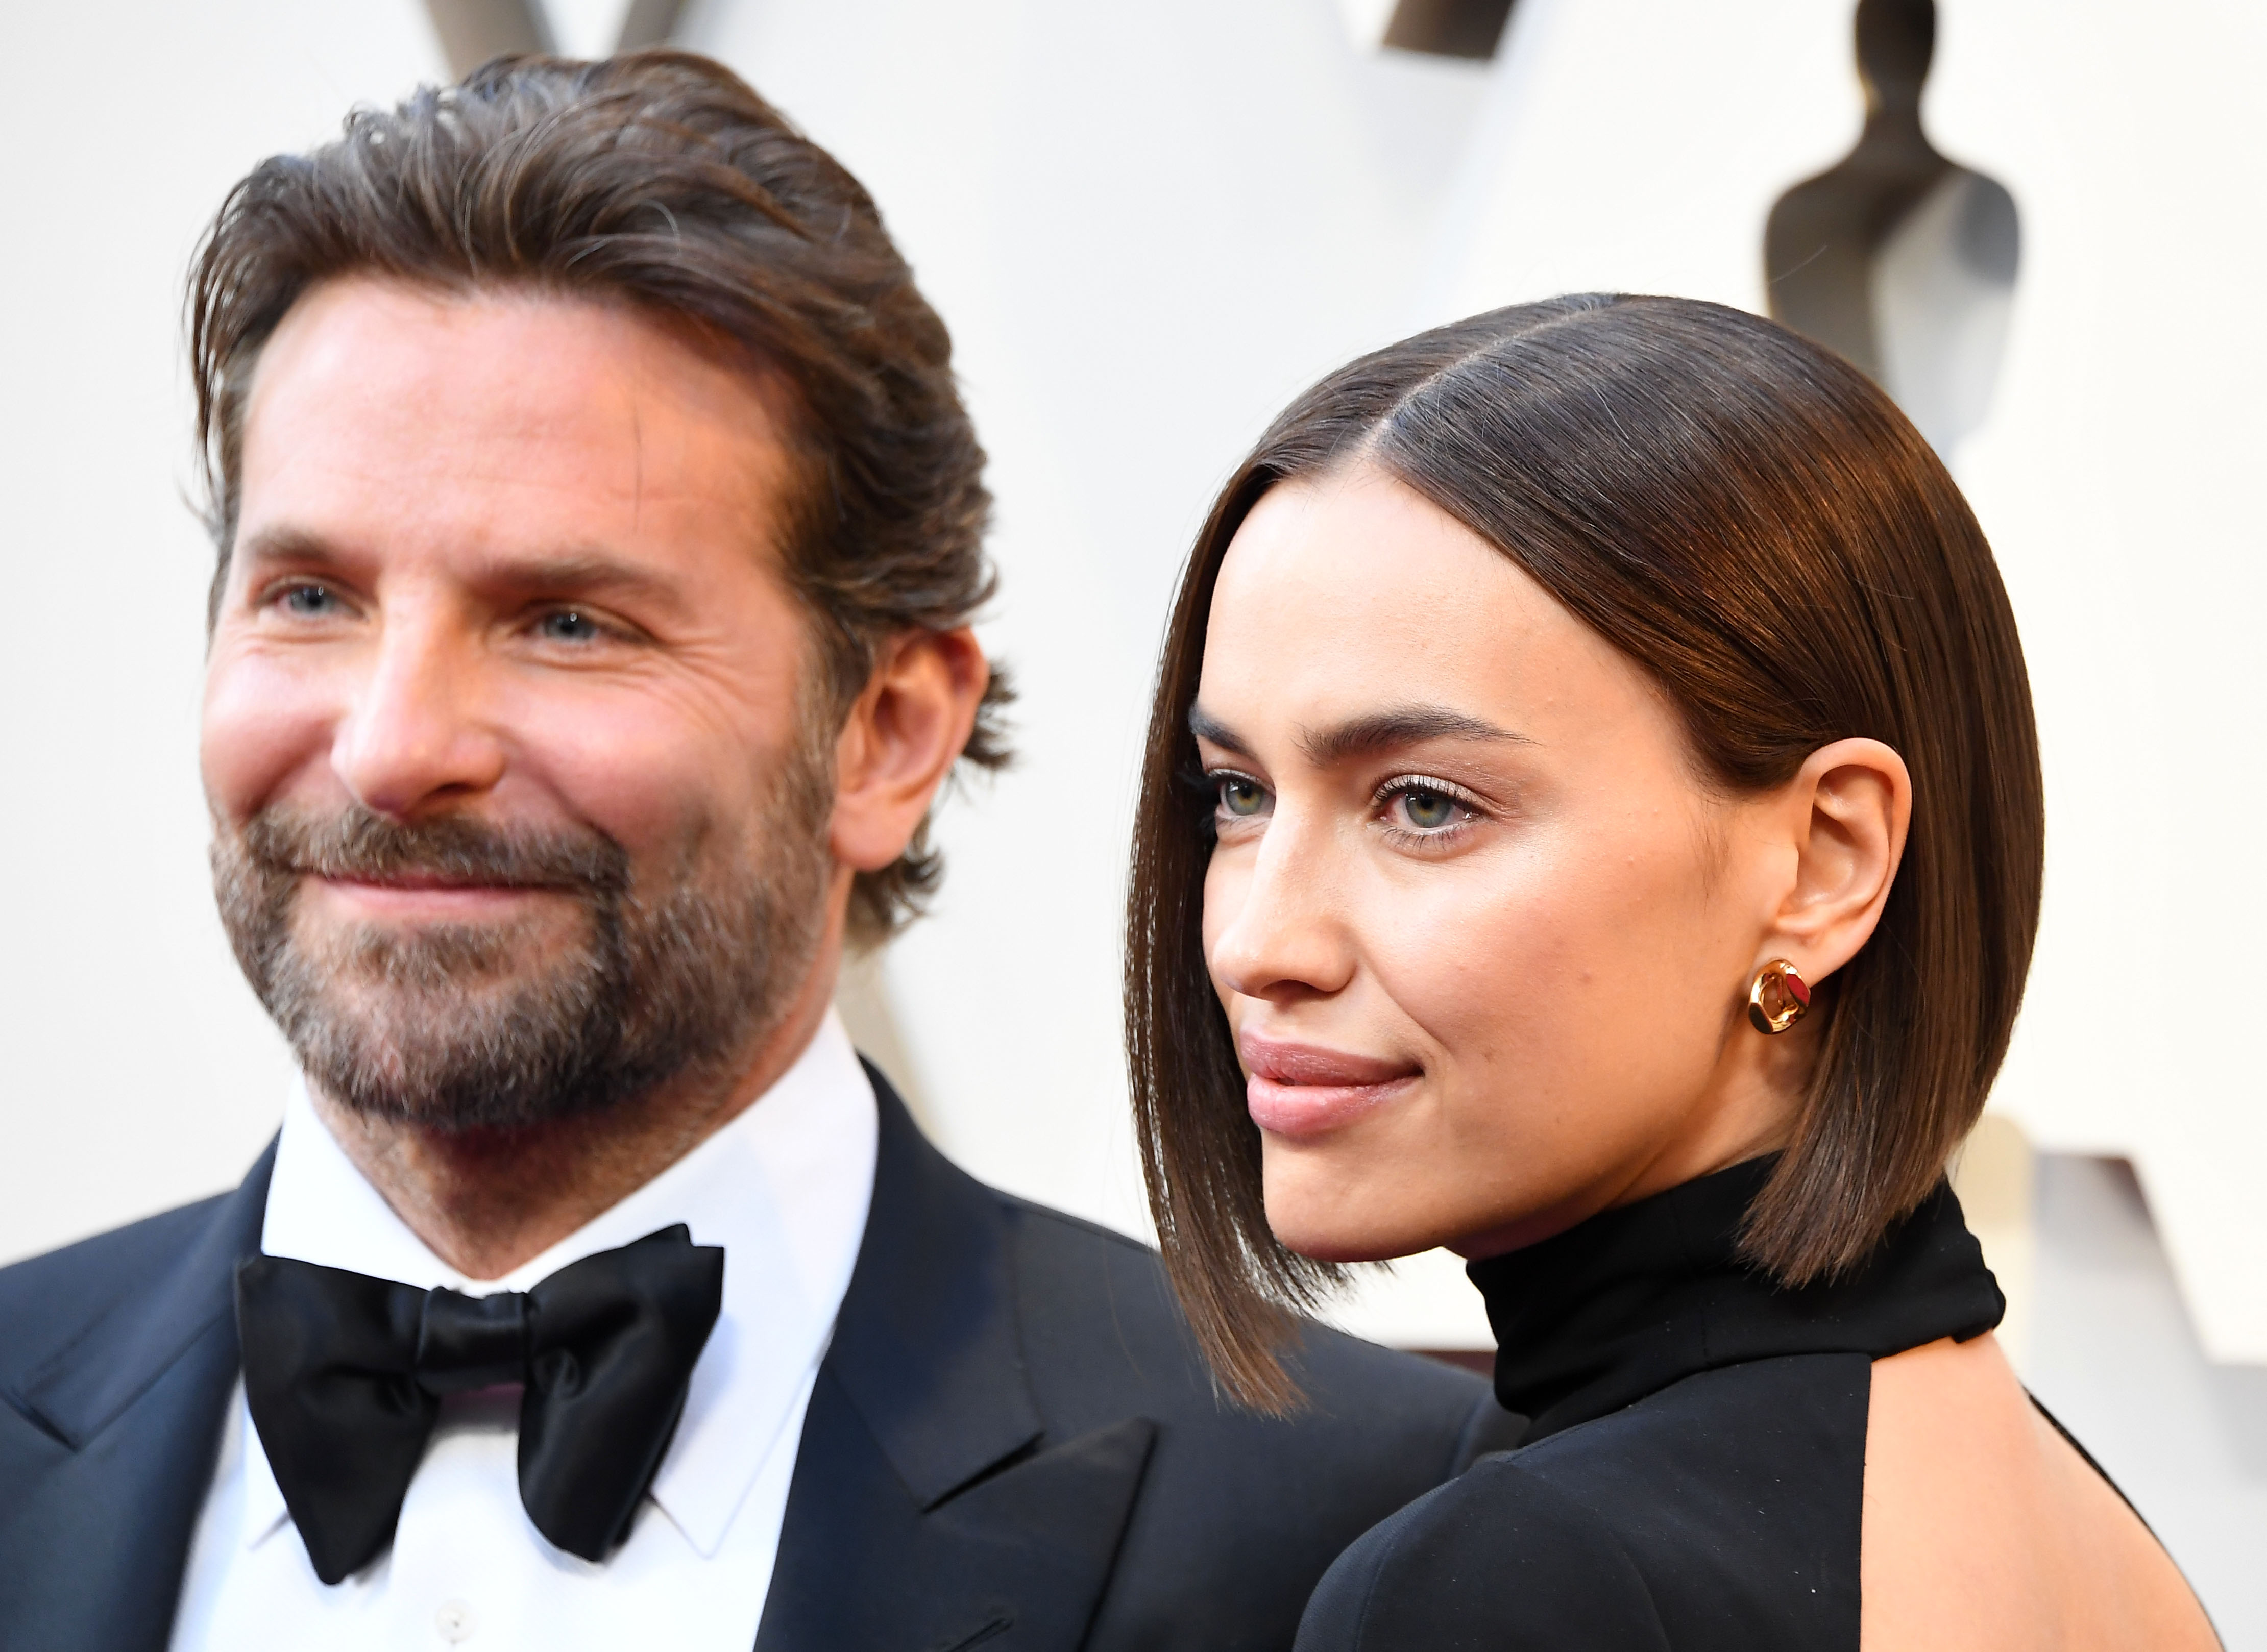 Bradley Cooper and Irina Shayk on February 24, 2019 in Hollywood, California. | Source: Getty Images